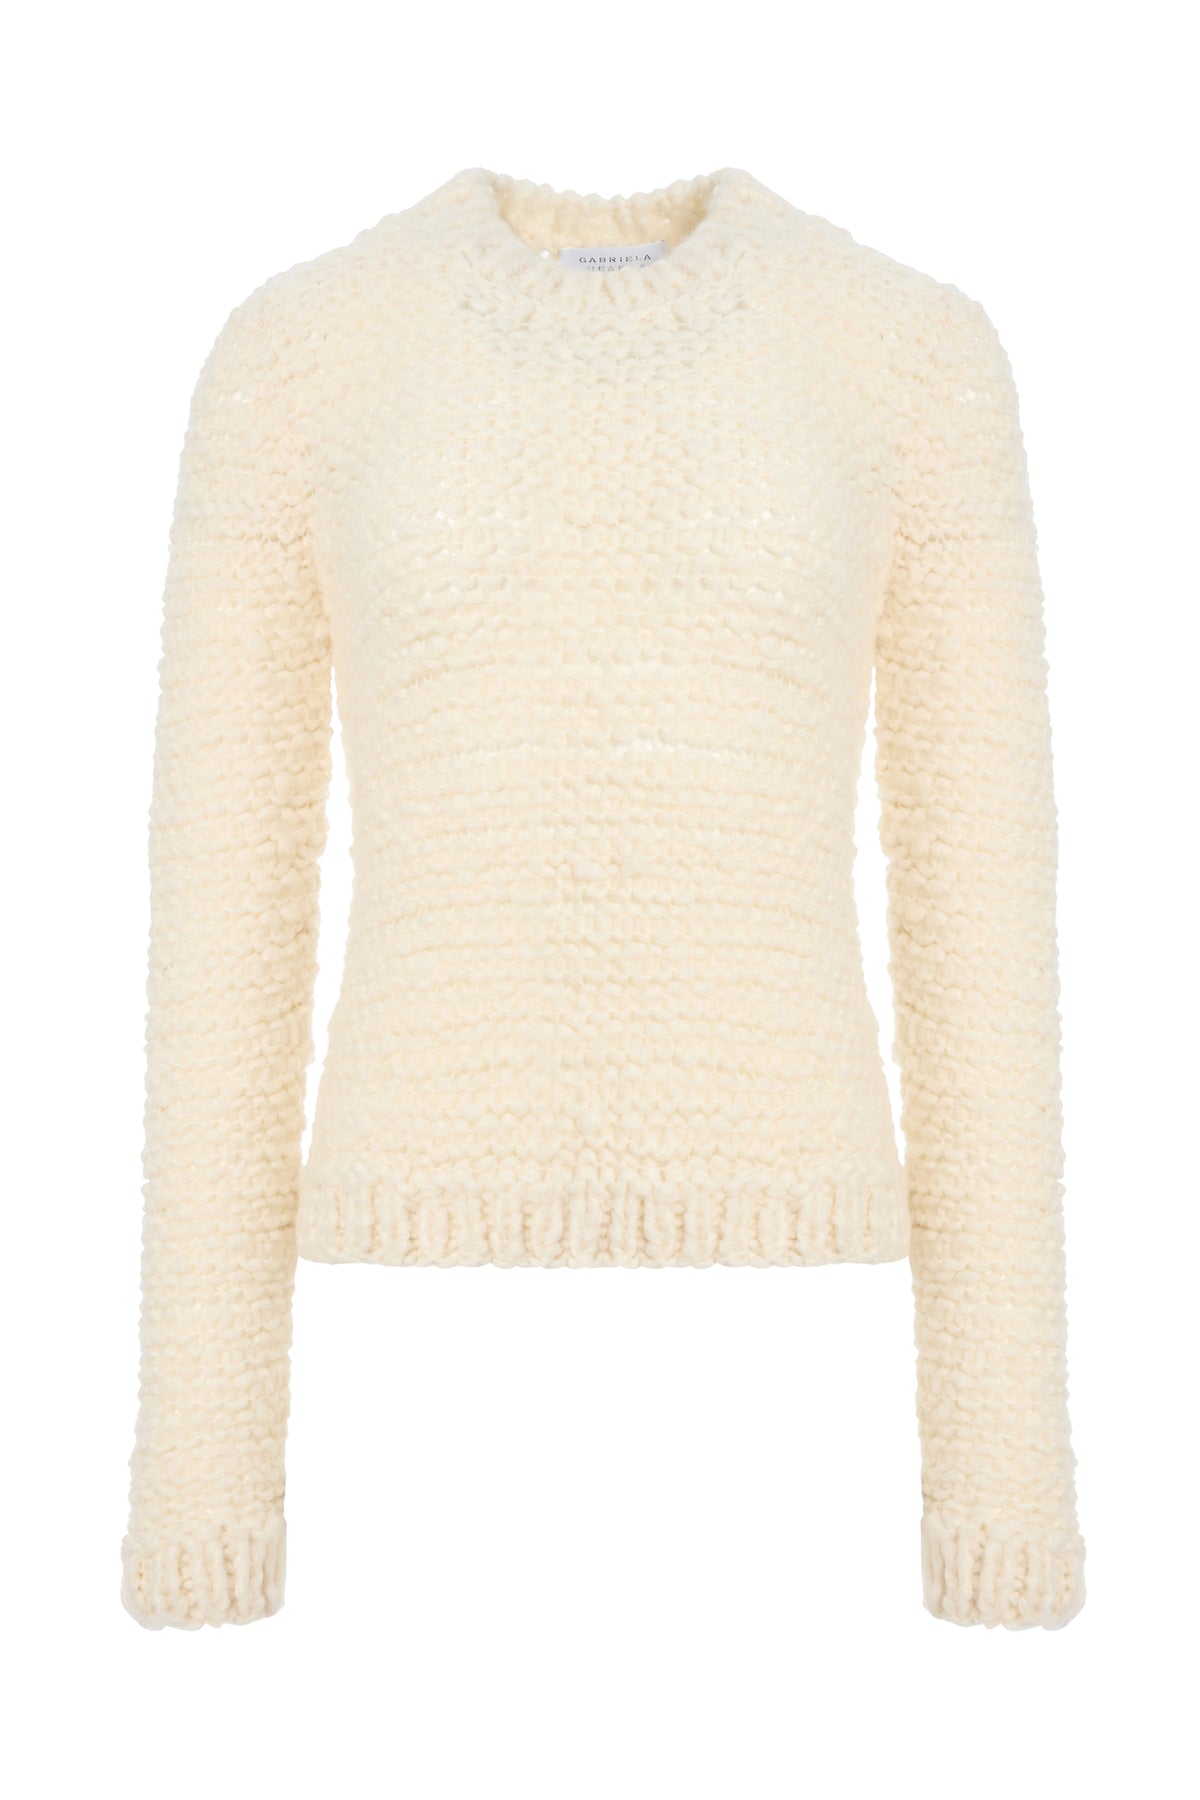 Durand Knit Sweater in Ivory Welfat Cashmere